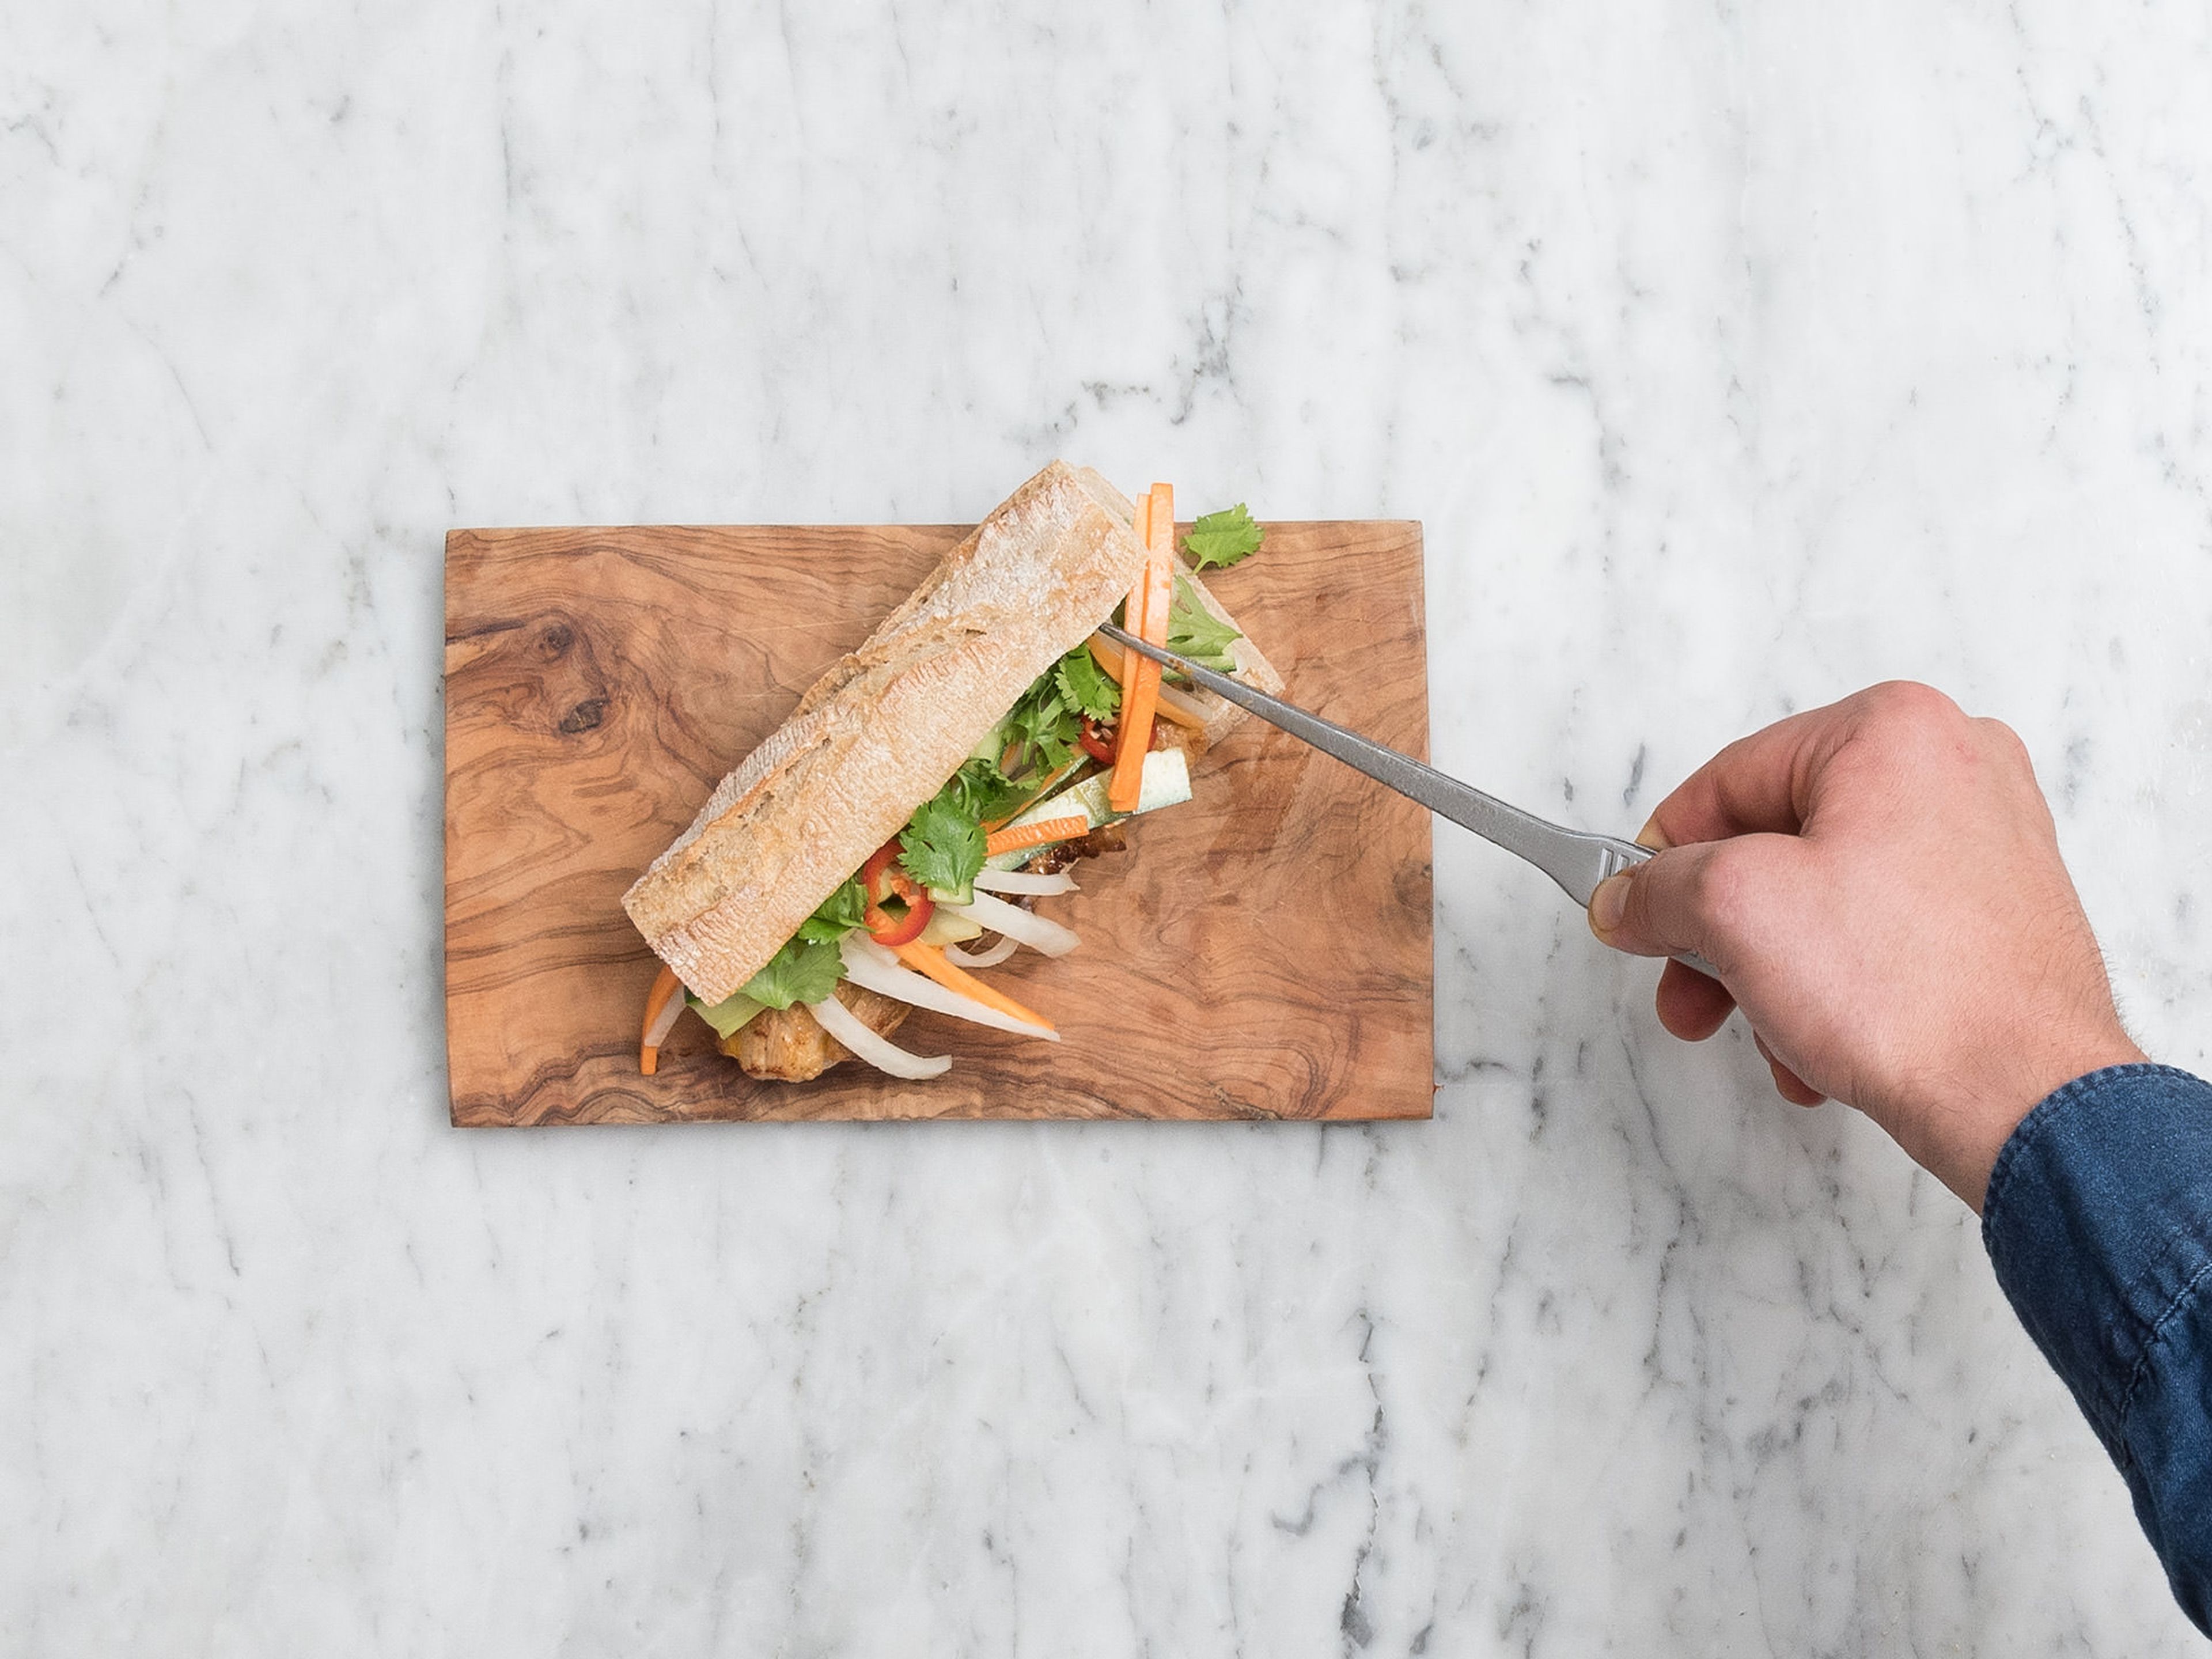 Cut off ends of baguettes and halve crosswise, then cut each piece lengthwise and spread Thai red curry sauce on both halves. Layer with sliced pork belly, quick pickled vegetables, chili slices, and cilantro. Enjoy!